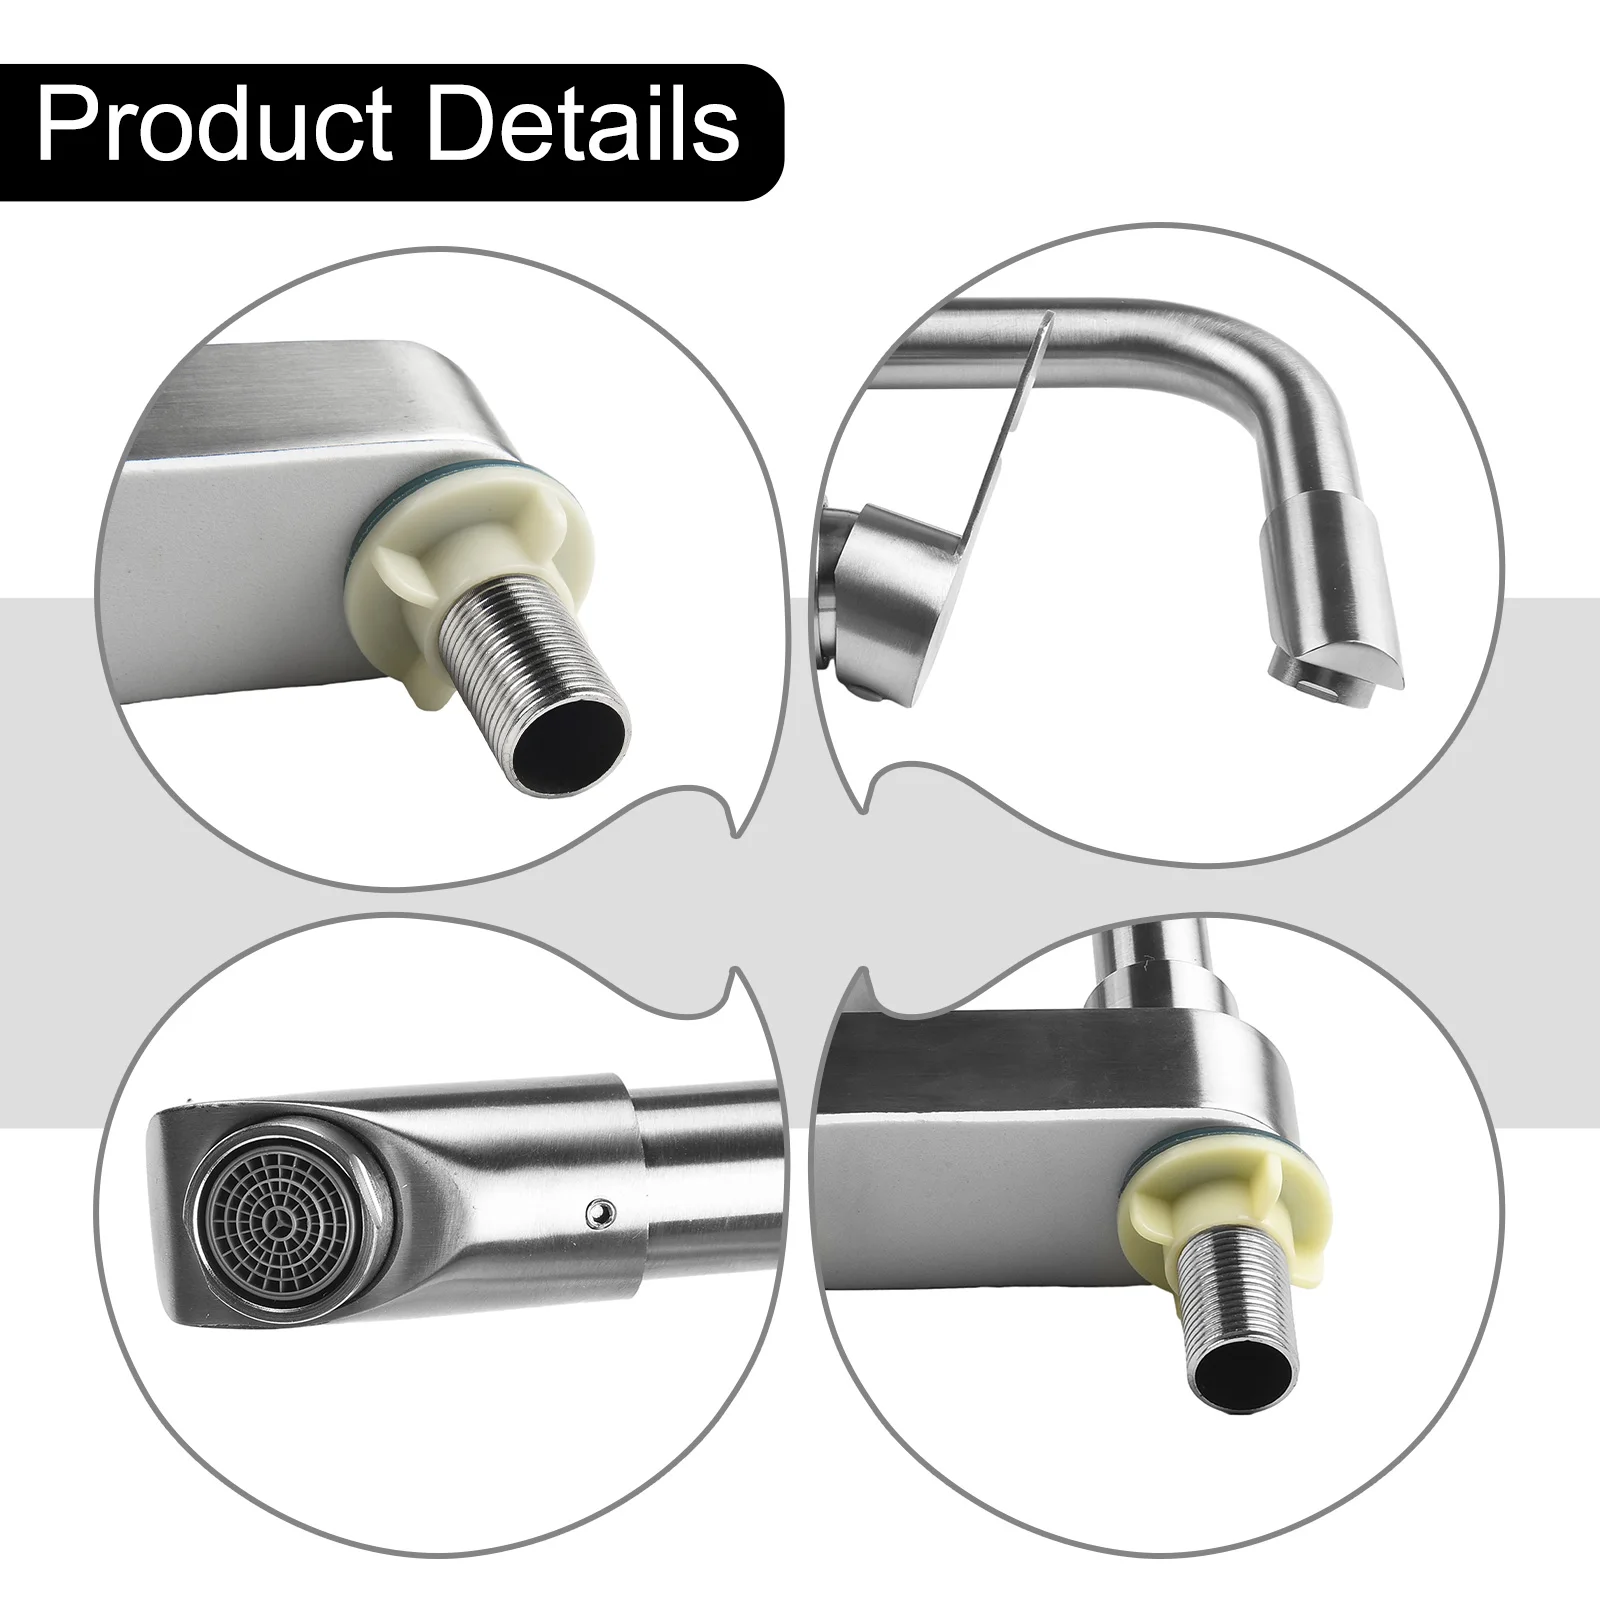 

Sink Mixer Taps Basin Faucet 2 Holes 304 Stainless Steel Bathroom Ceramic Valve Contemporary Single Handle Easy Clean